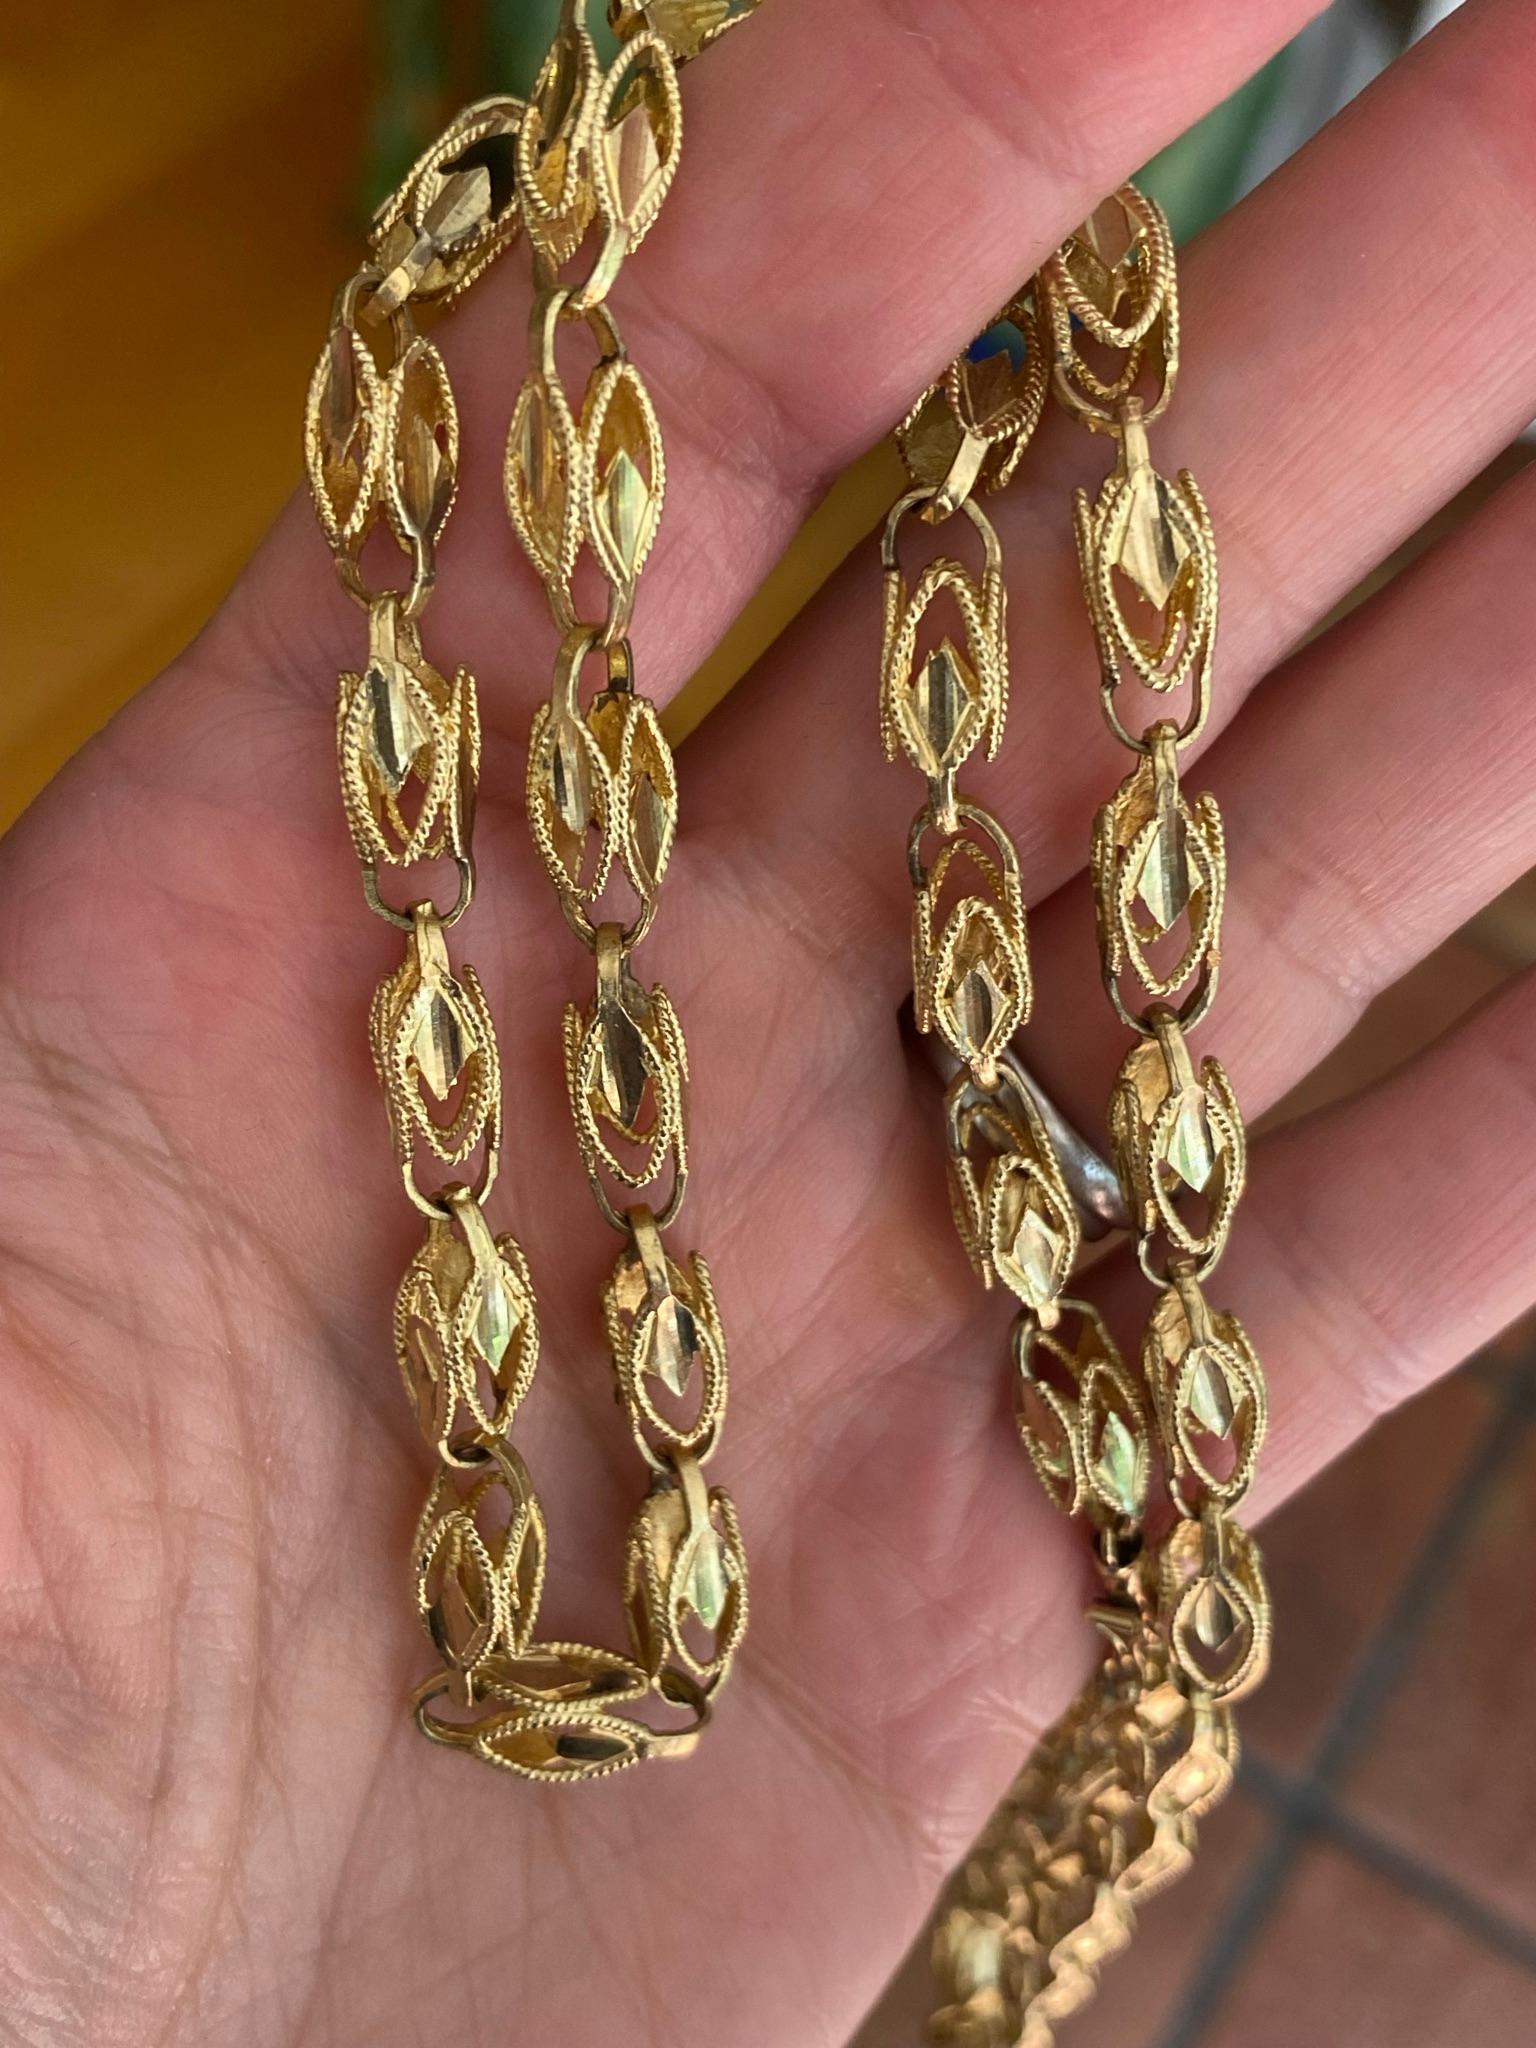 Antique Gold Chain Link Necklace In Good Condition For Sale In Denver, CO